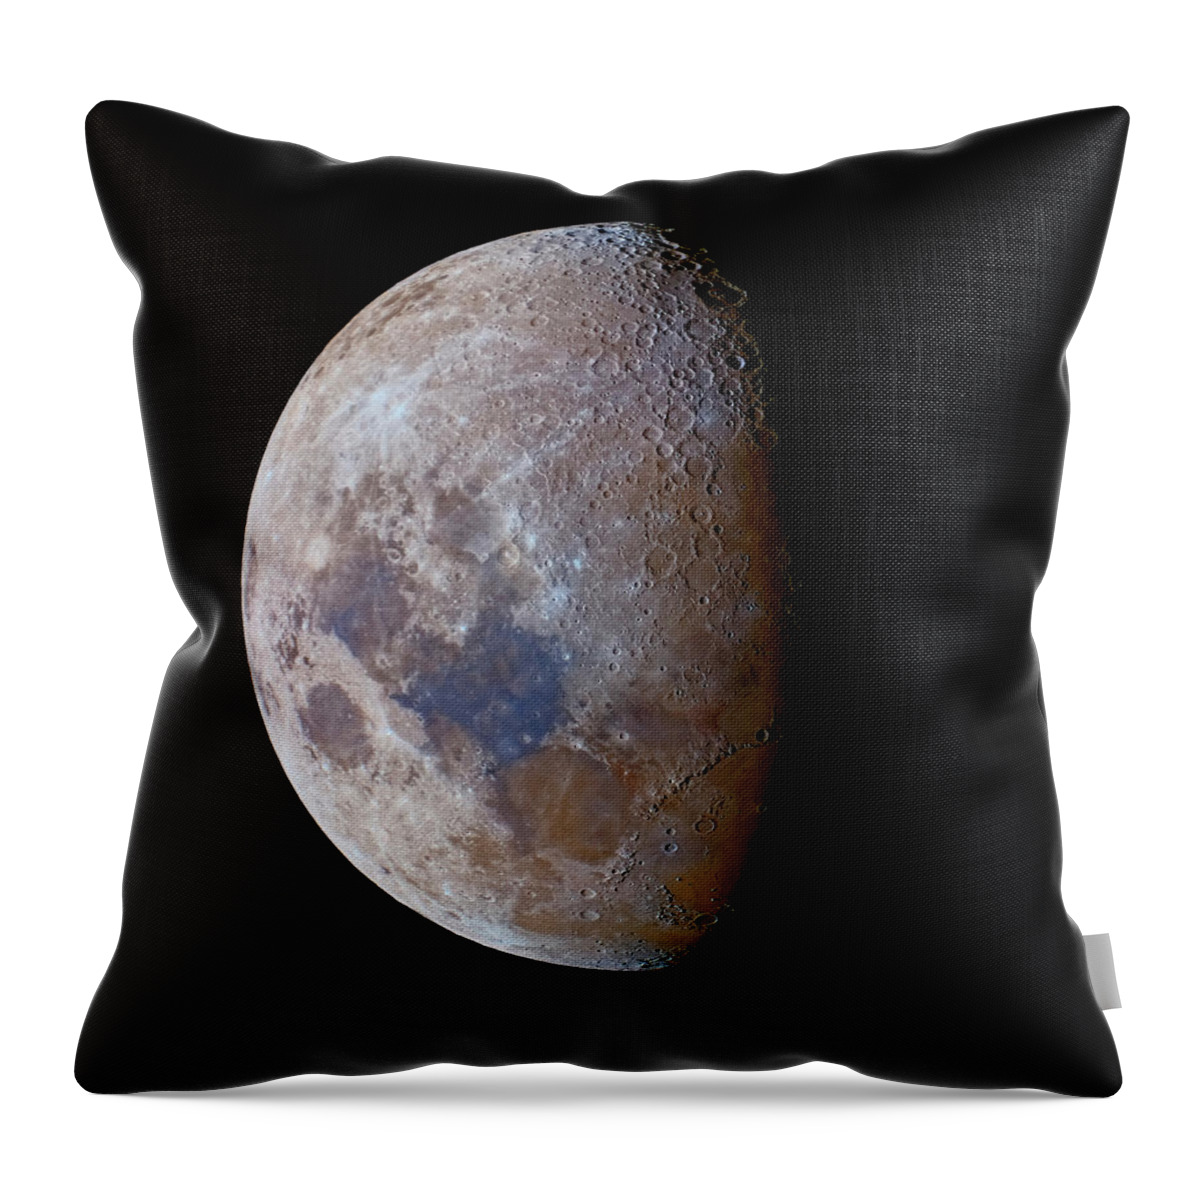 Black Background Throw Pillow featuring the photograph The Crescent Moon Past First Quarter In by Luis Argerich/stocktrek Images